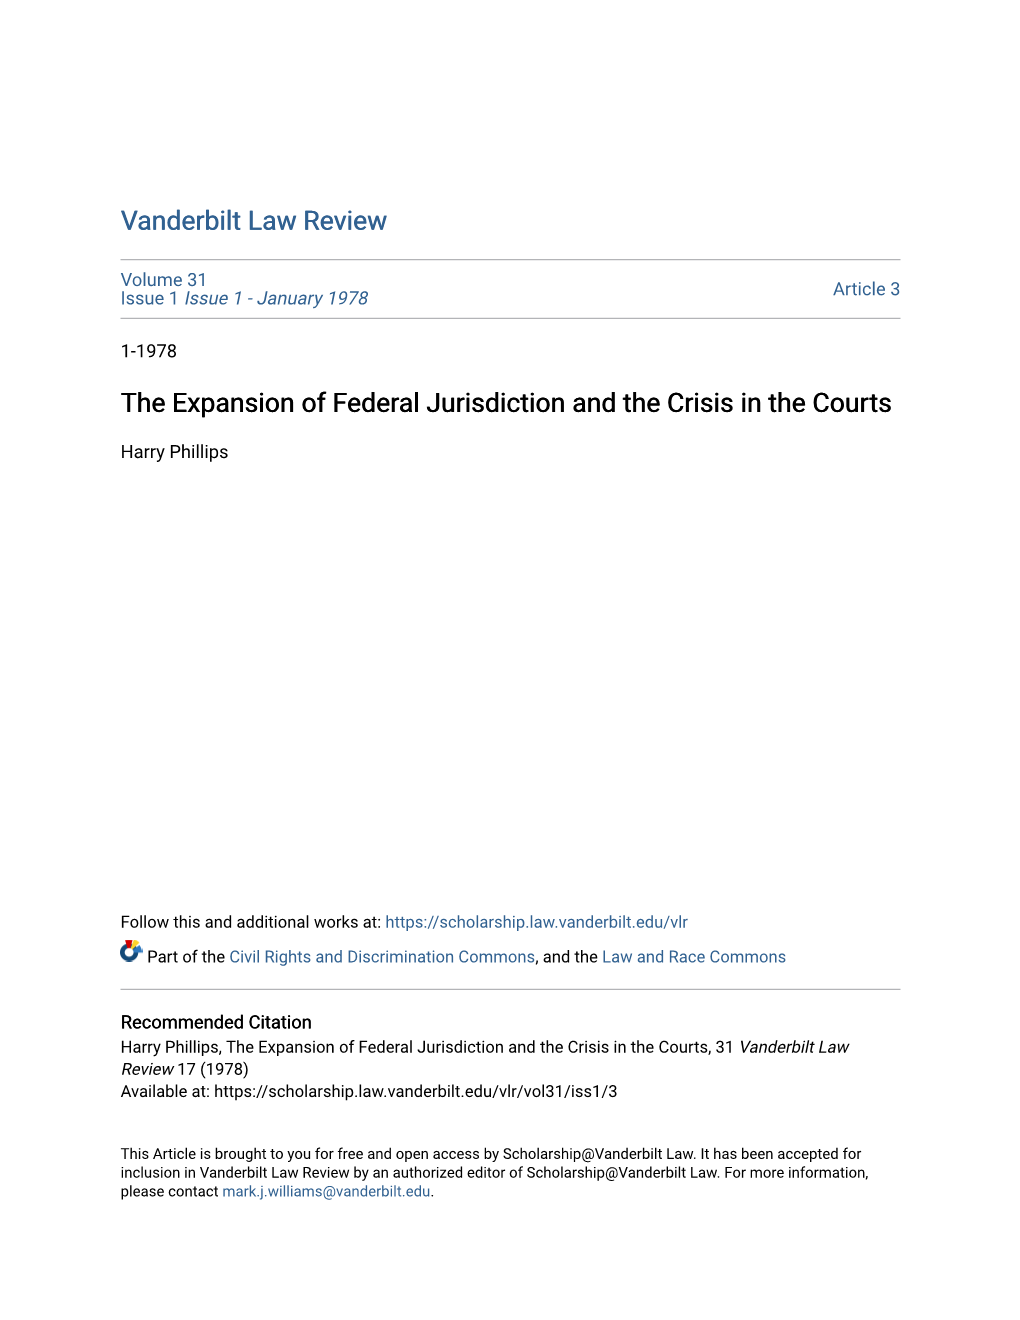 The Expansion of Federal Jurisdiction and the Crisis in the Courts